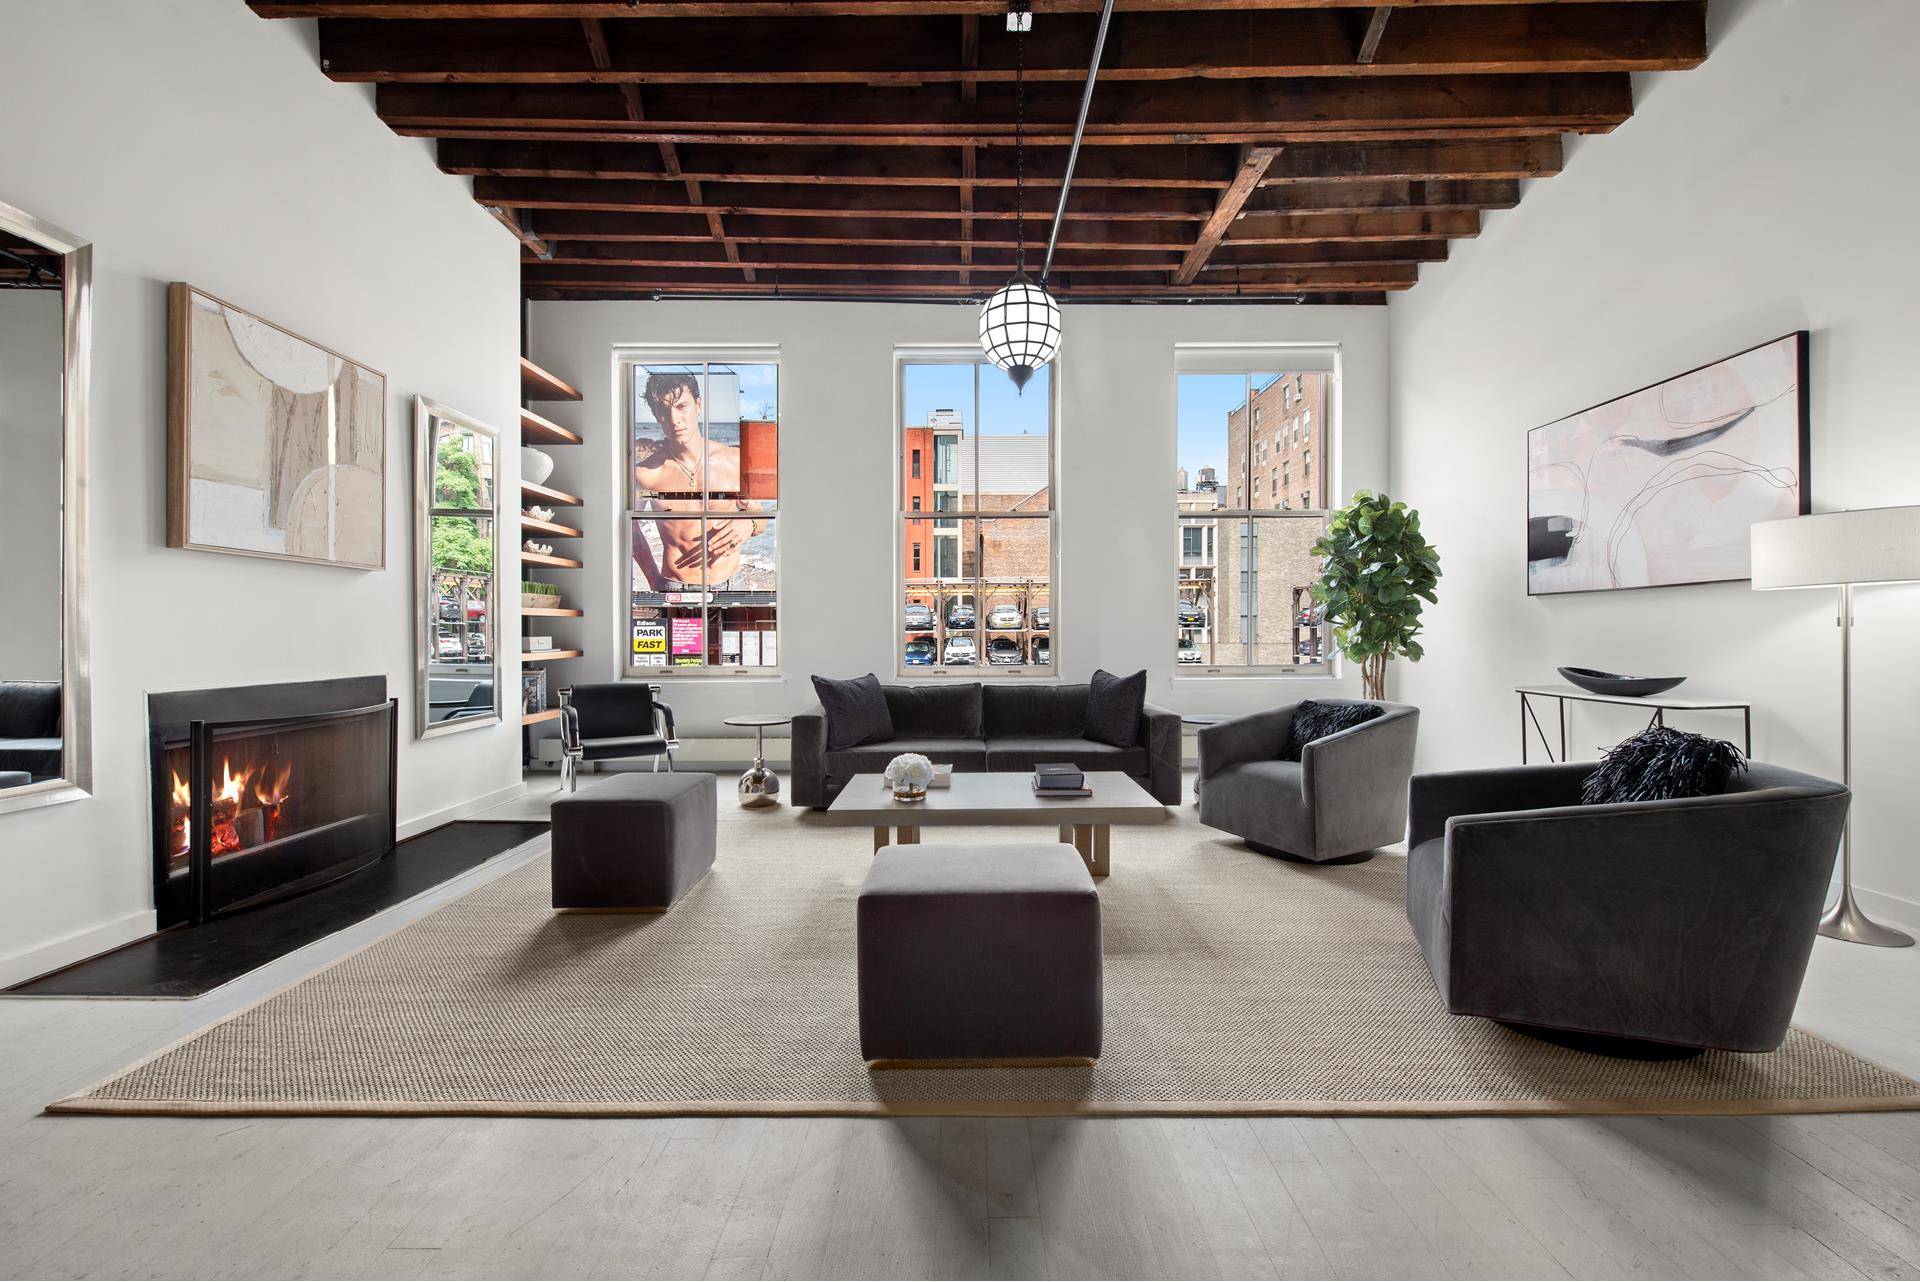 Welcome to this classic two bedroom condominium NoHo loft, with wood burning fireplace, private outdoor space, central air and private laundry a true find nestled in a landmarked neighborhood.